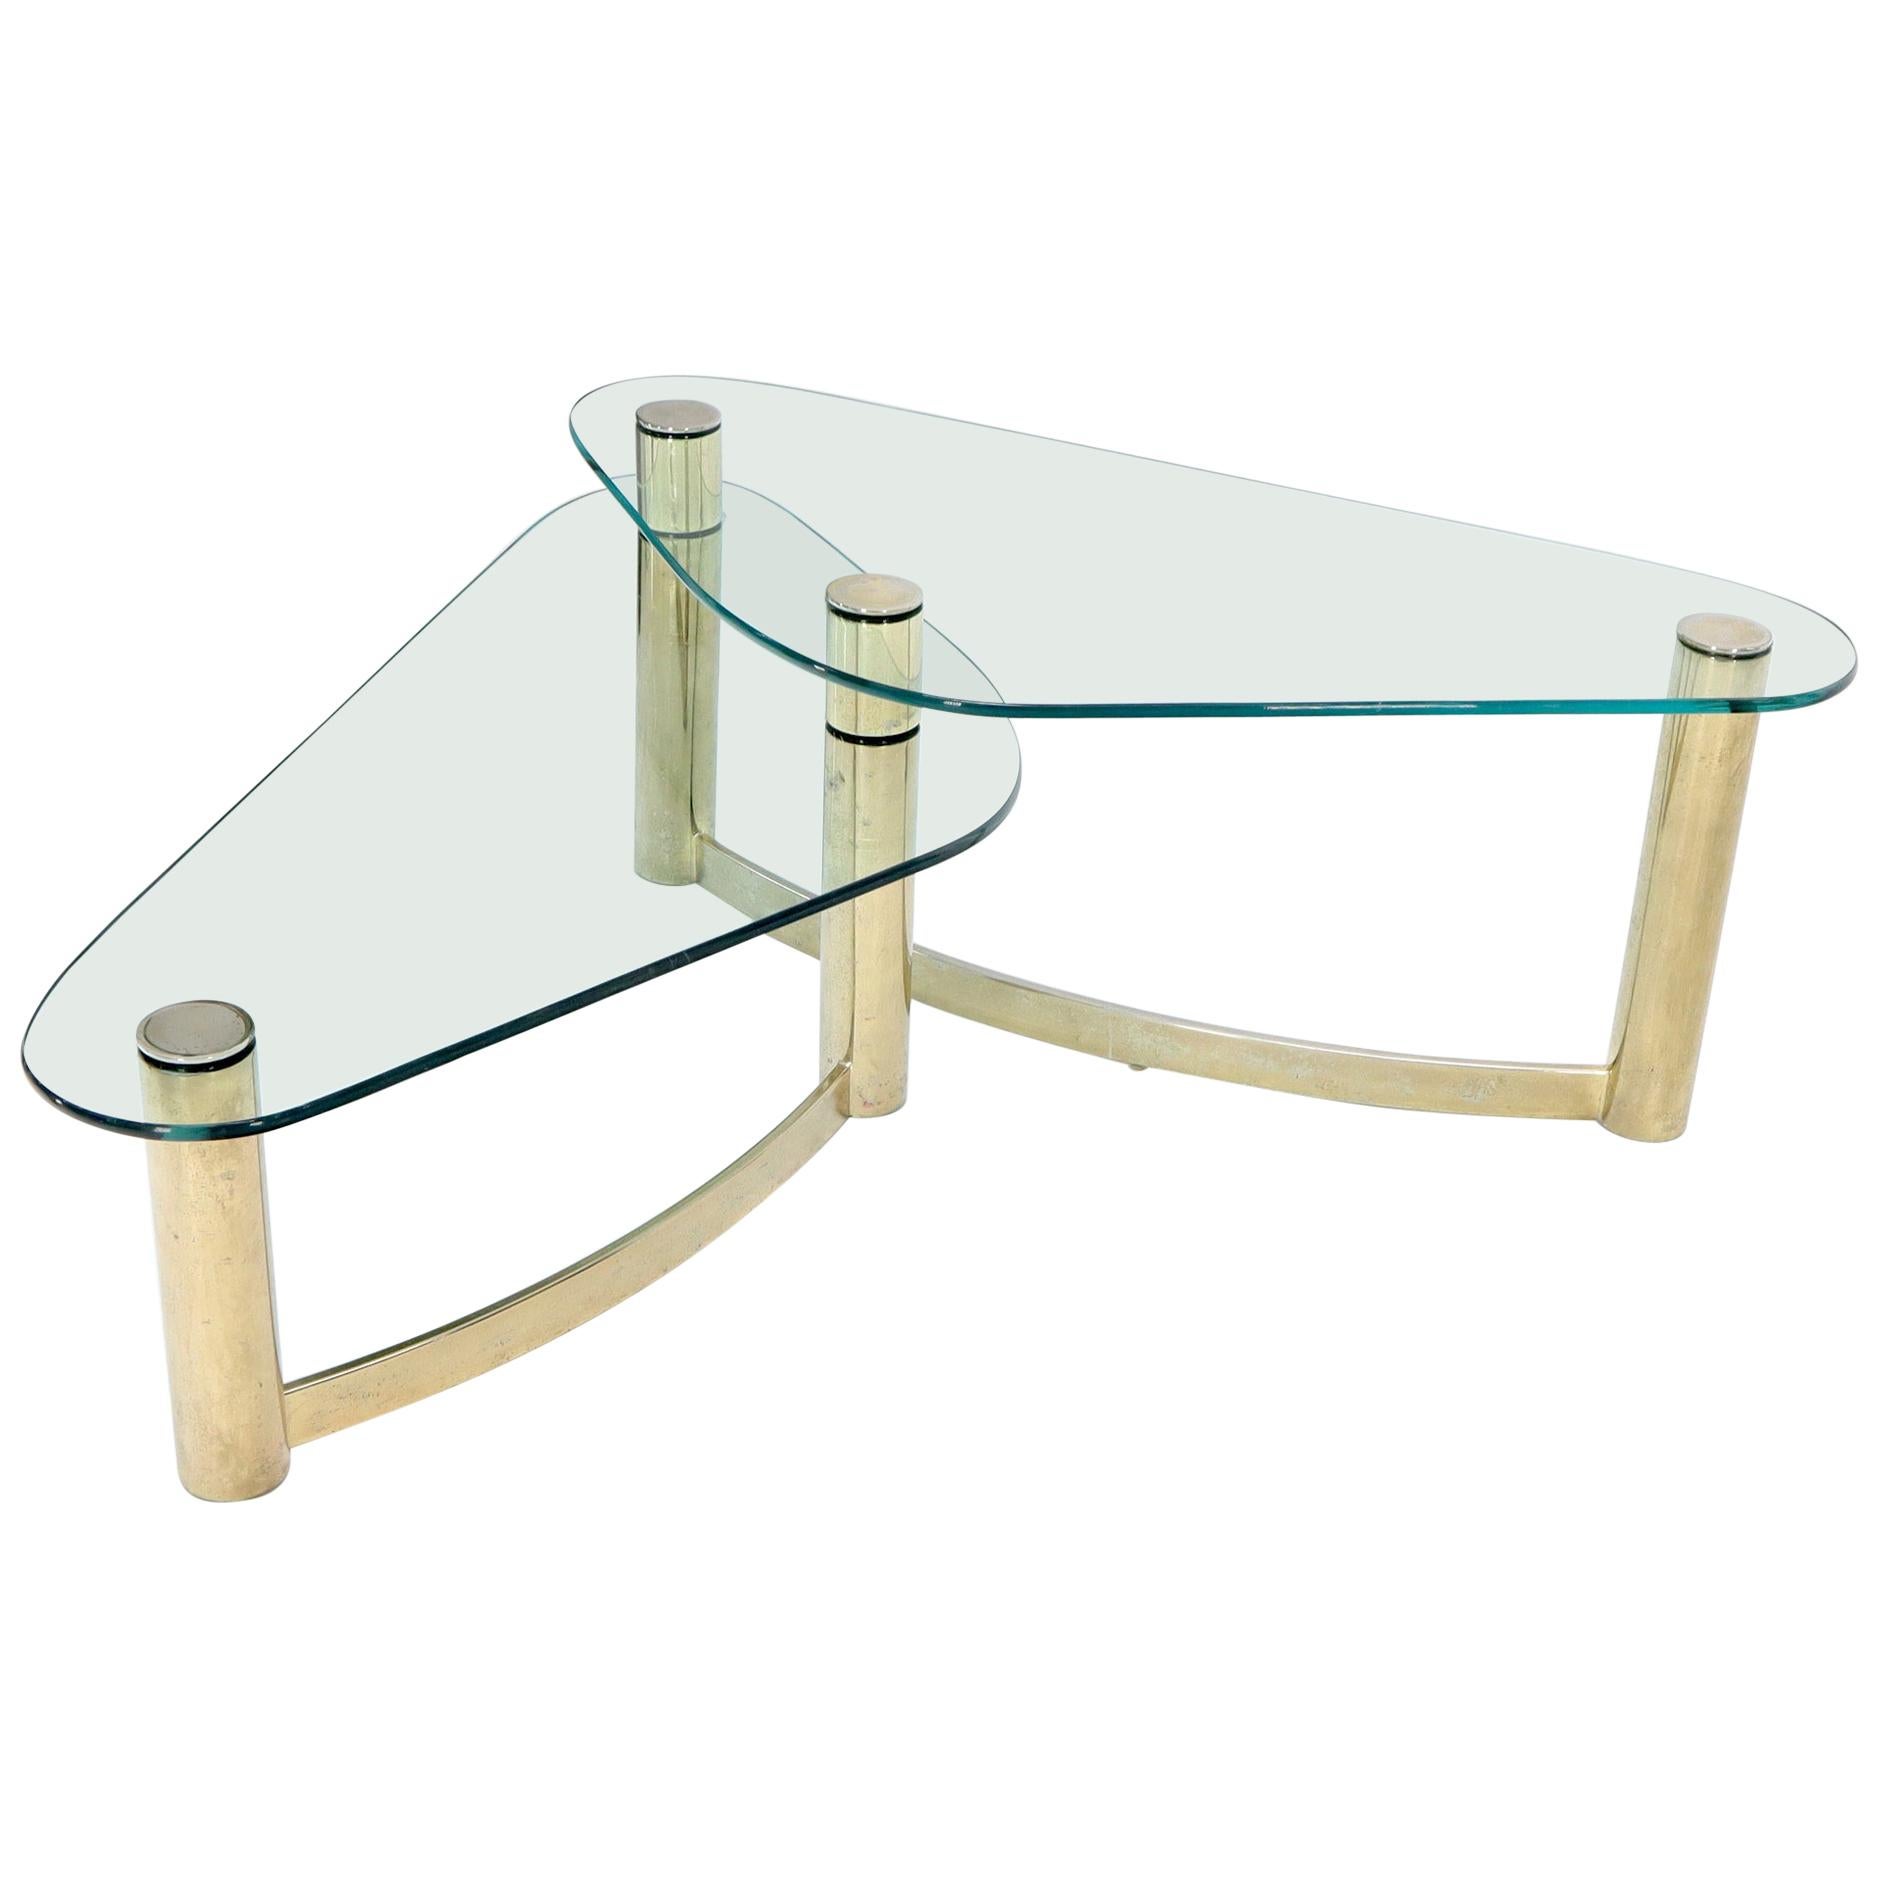 Two-Tier "L" Shape Glass and Brass Organic Kidney Shape Coffee Table